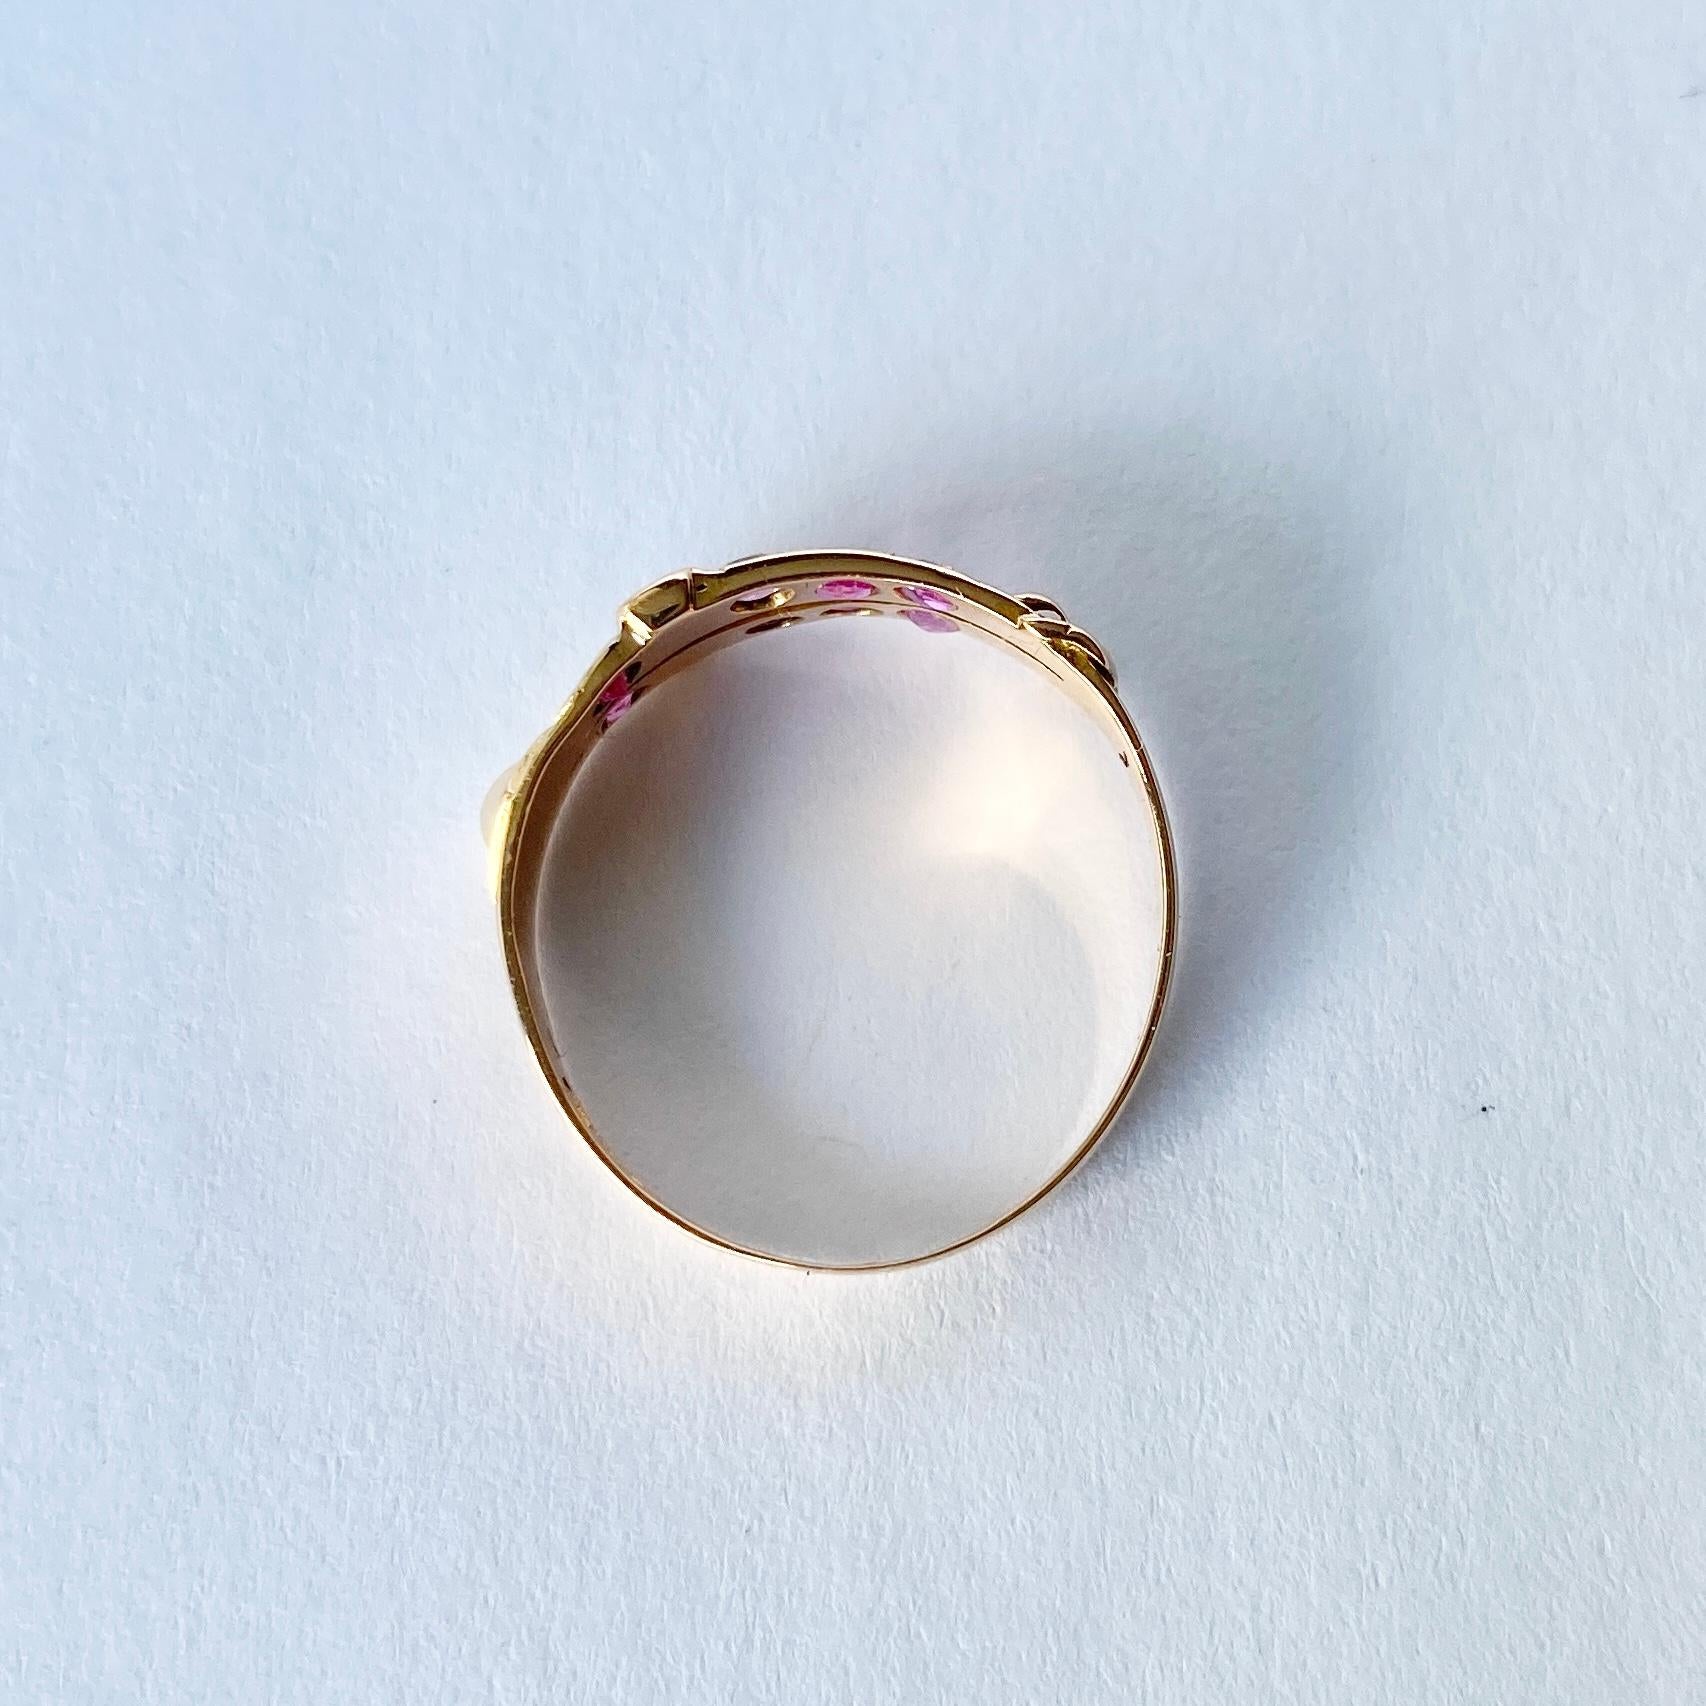 This sweet ring holds a total of approx 20pts. There also pearls set into the ring. The 18carat gold is beautifully crafted into a double buckle design. Fully Hallmarked Birmingham 1876.

Ring Size: L 1/2 or 6 
Band Width: 6mm

Weight: 1.5g